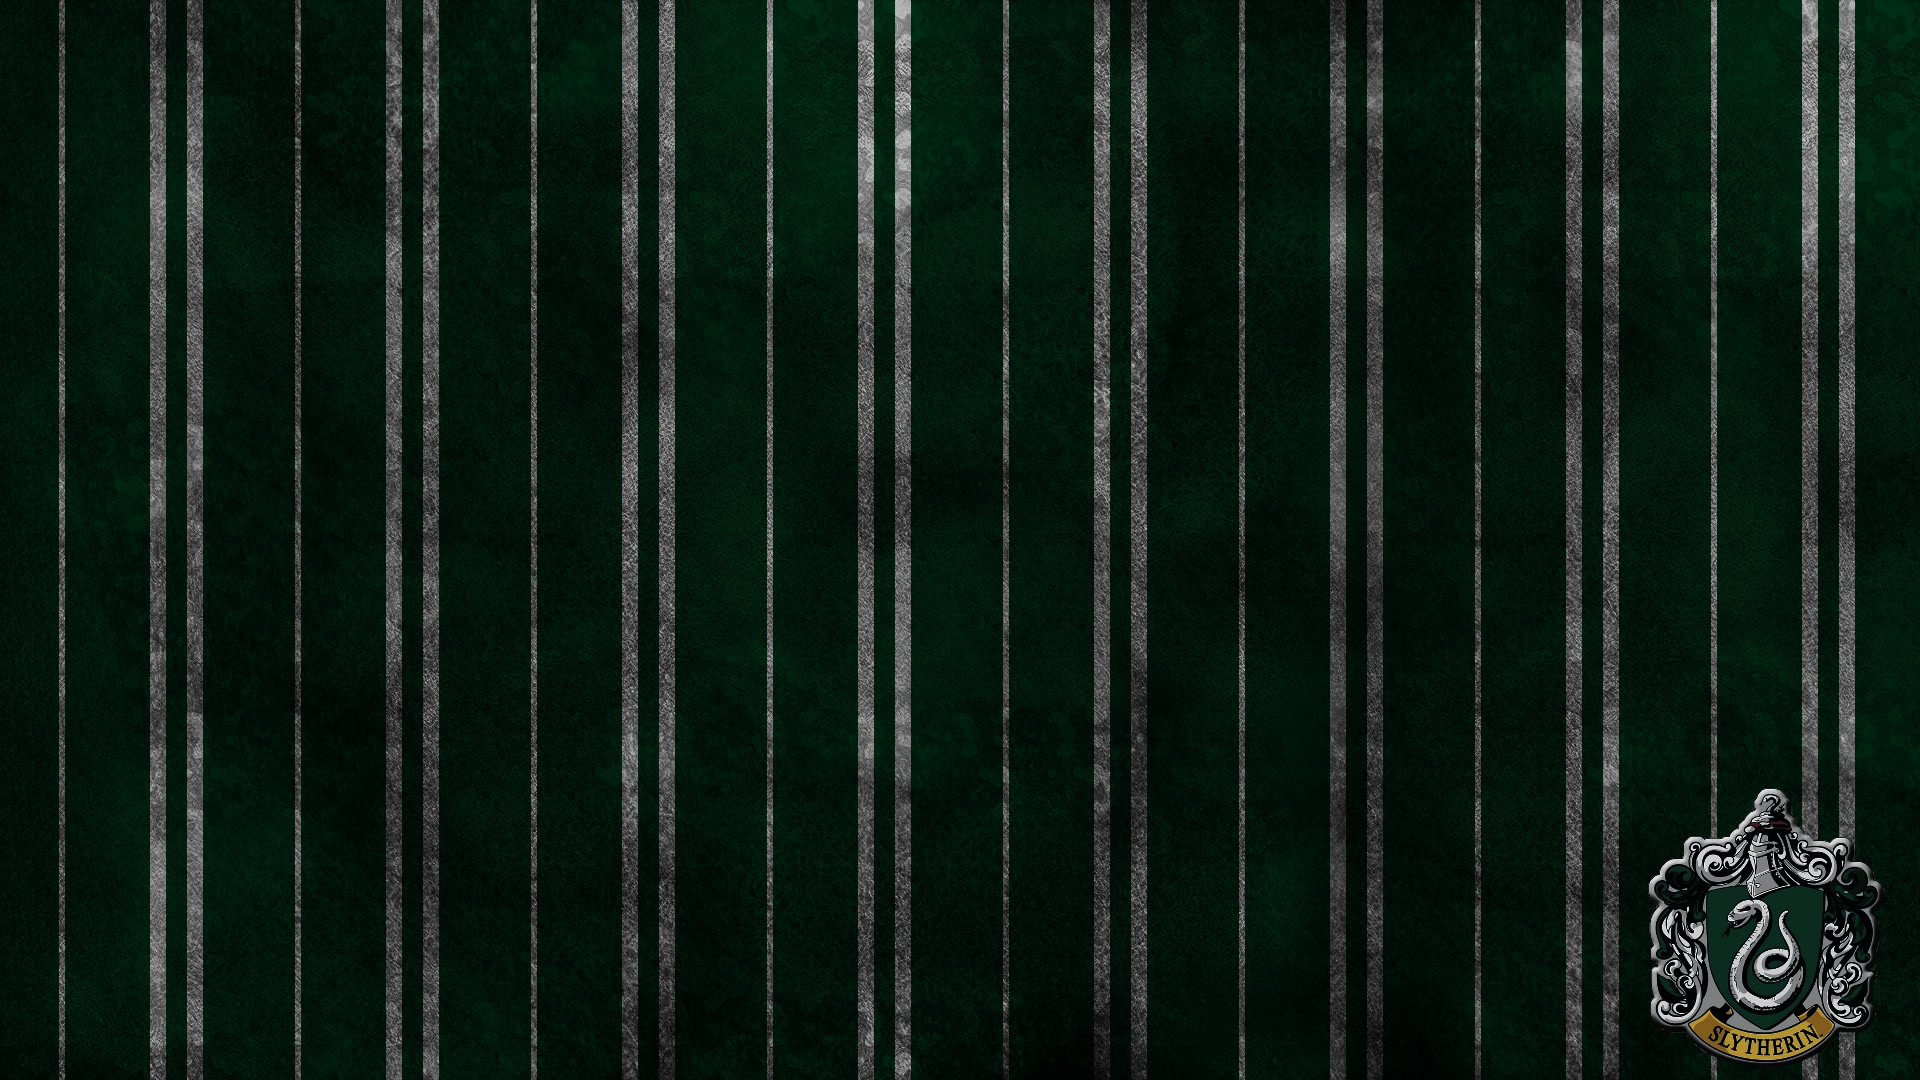 1920x1080 slytherin wallpapers hd stay staywallpaper 